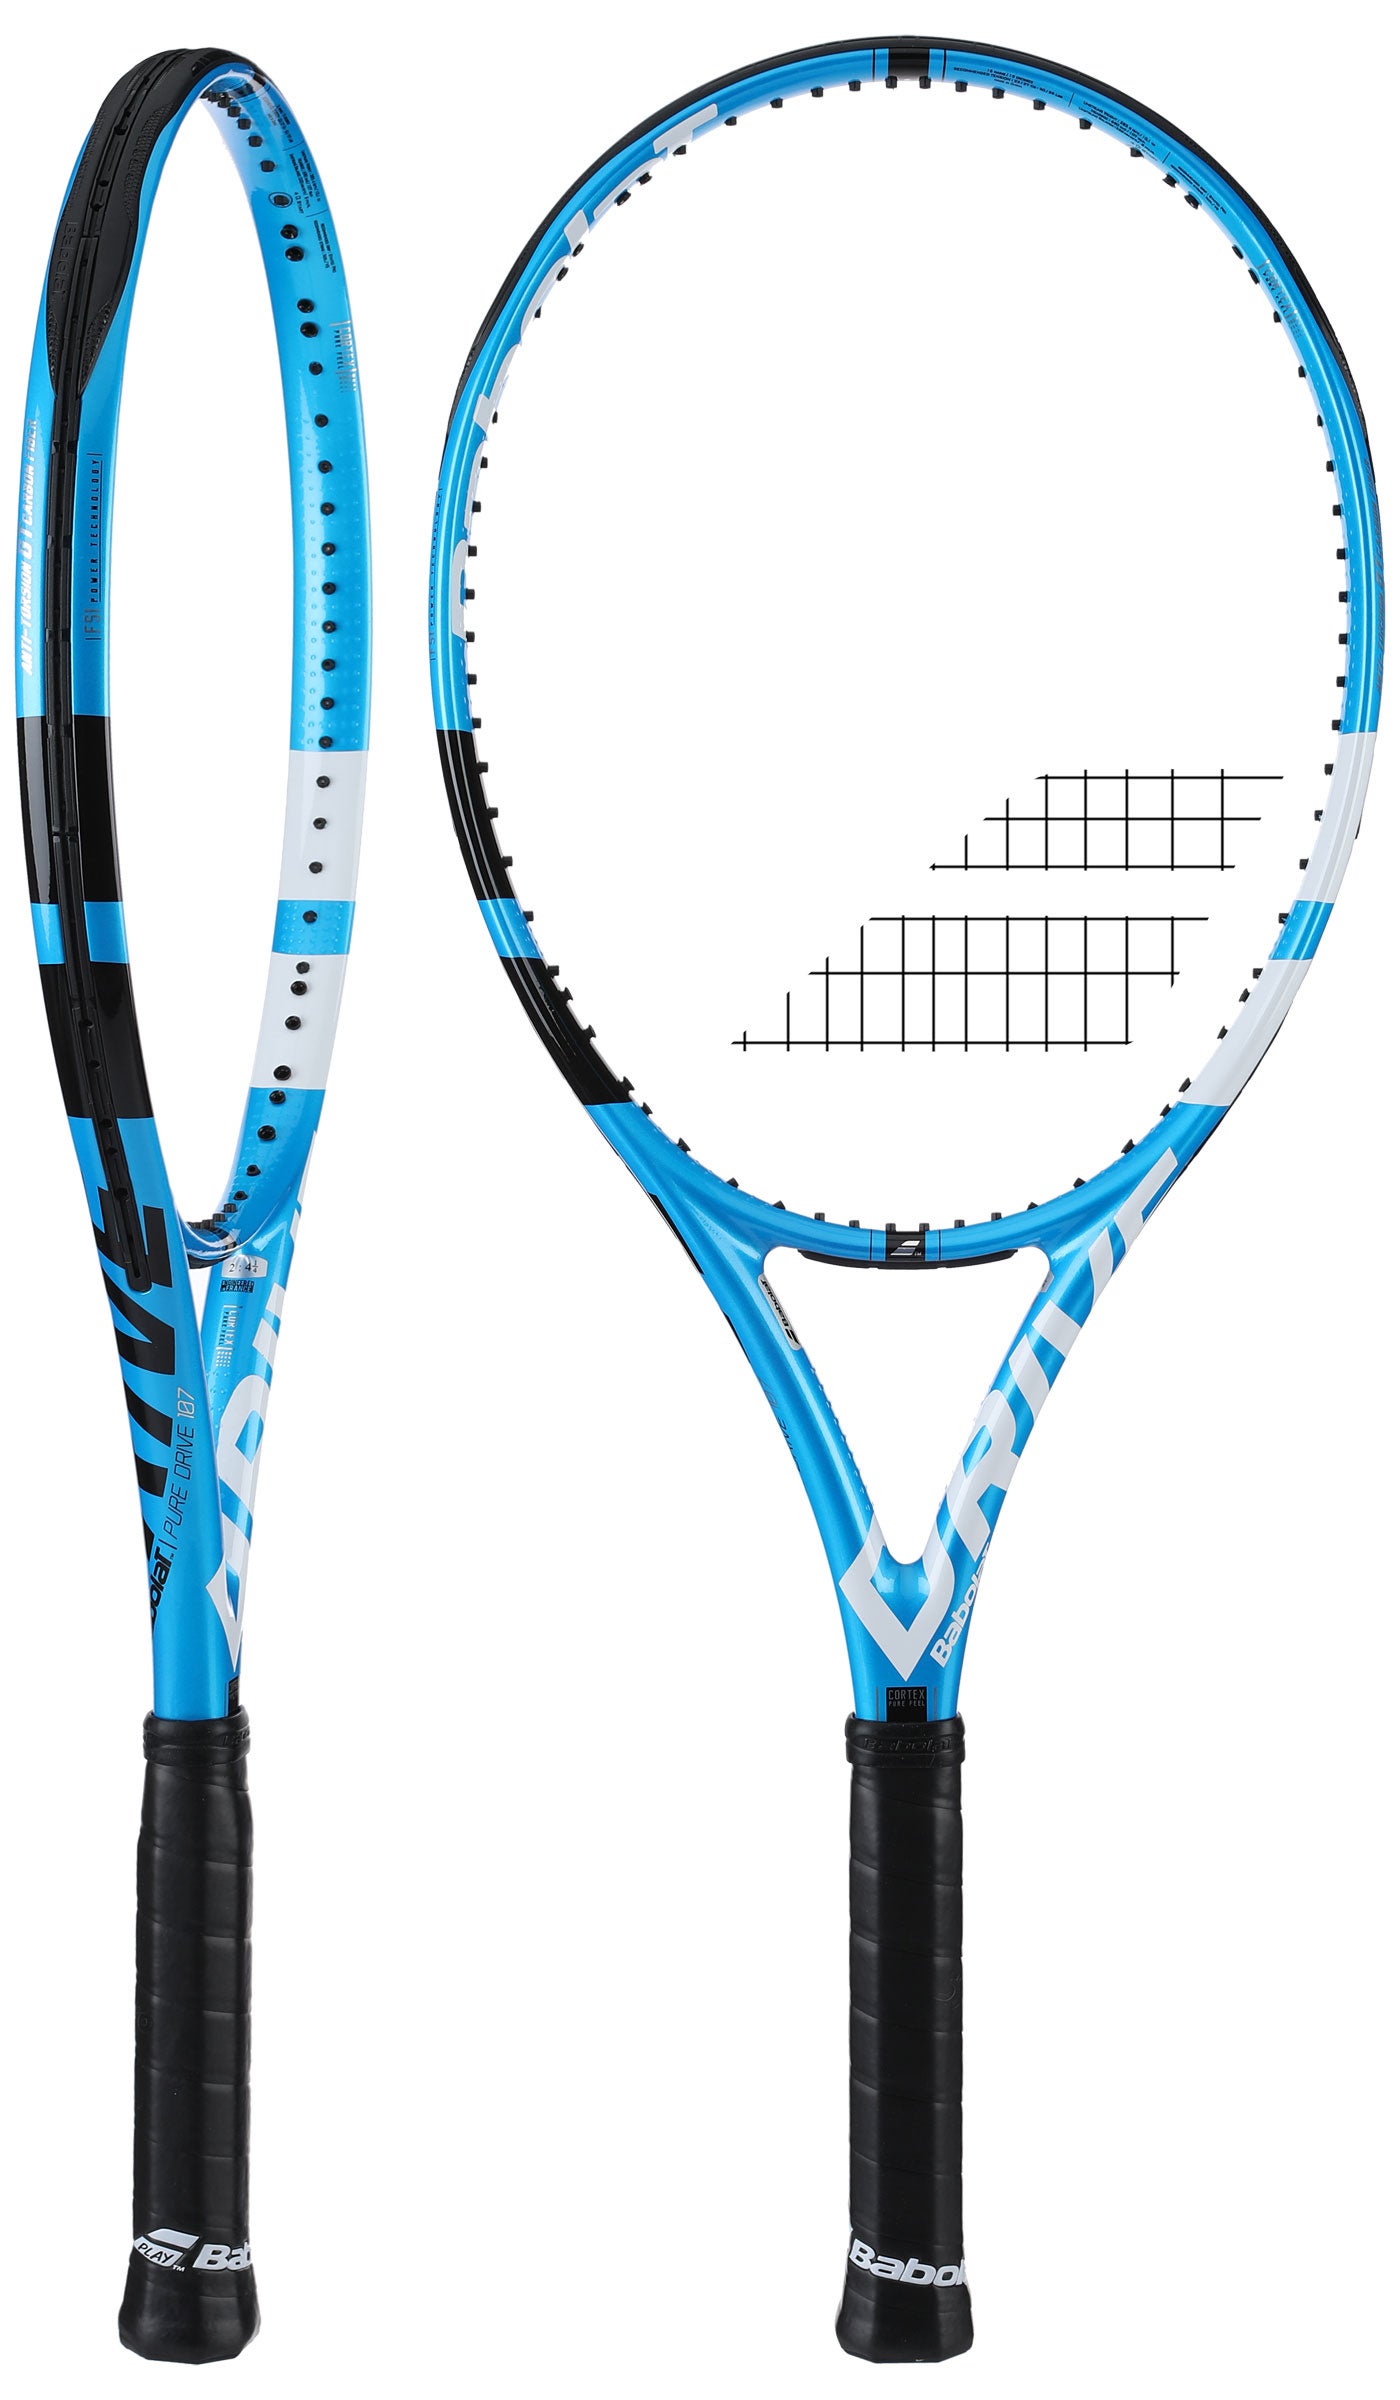 UNSTRUNG 4 1/4 **NEW OLD STOCK** 2018 BABOLAT PURE DRIVE 107 TENNIS RACQUET 